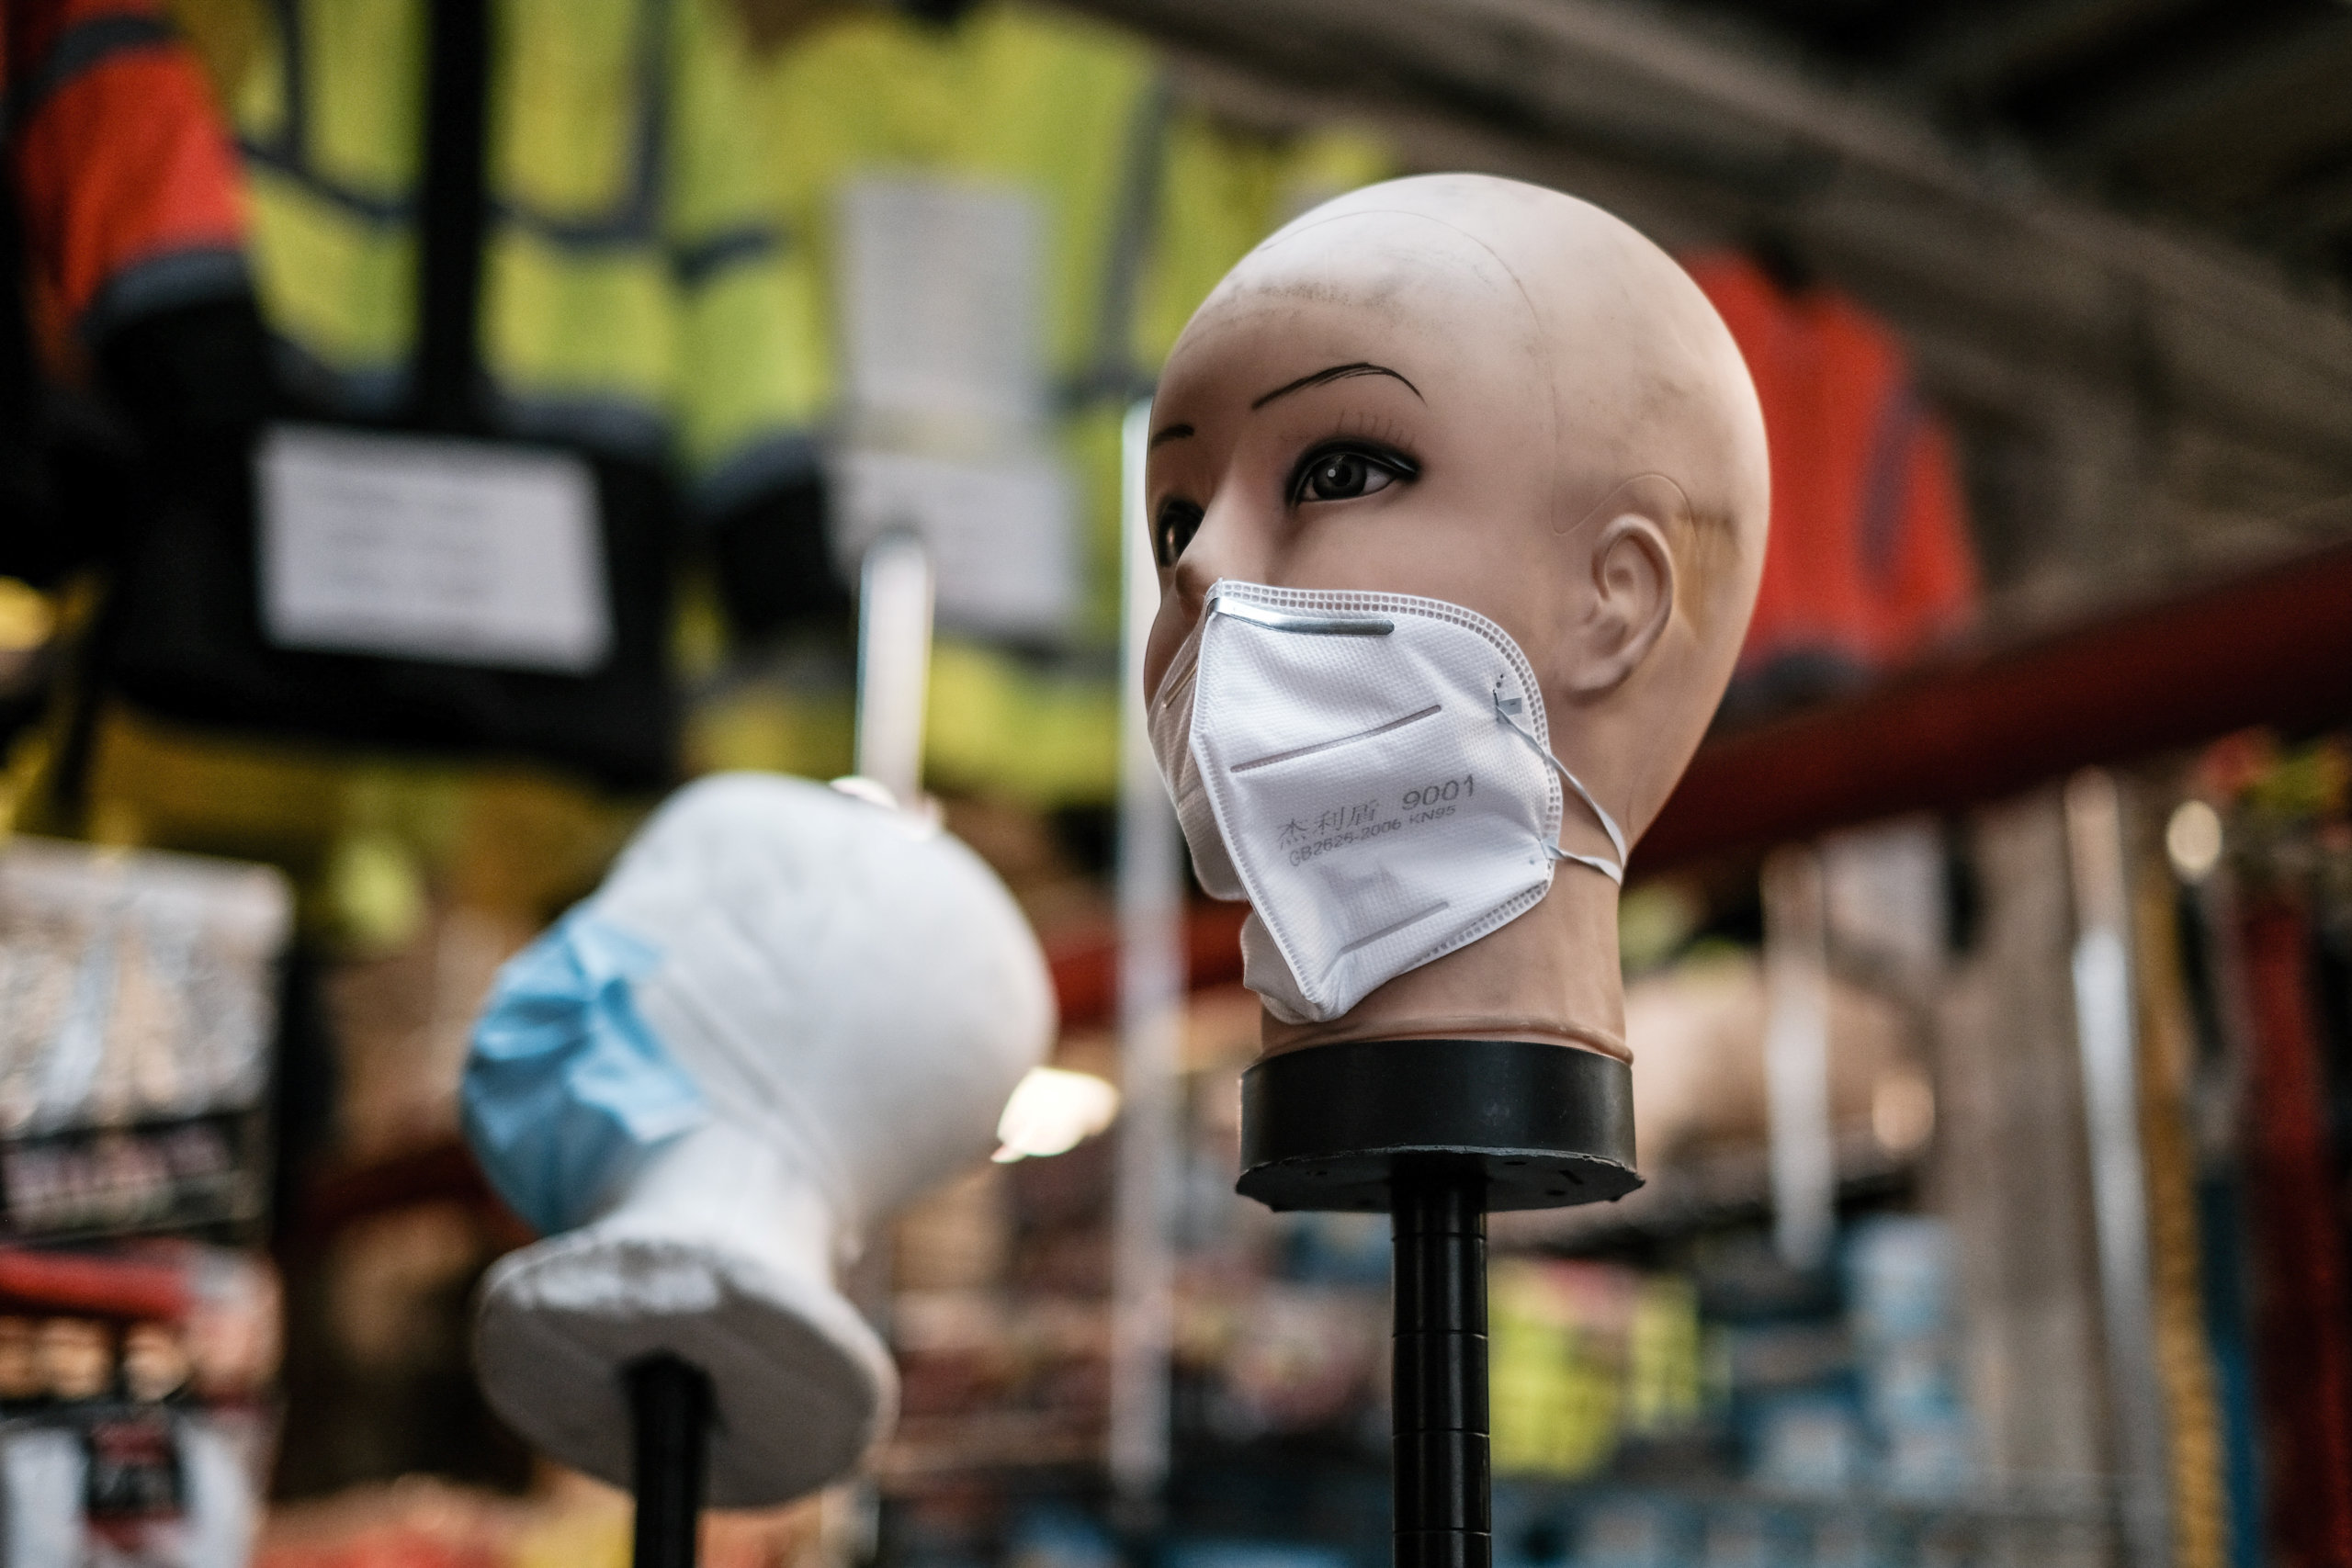 FILE PHOTO: A mannequin displays disposable face masks at a safety equipment store in the Brooklyn borough of New York City, U.S., March 26, 2020. REUTERS/Stephen Yang/File Photo